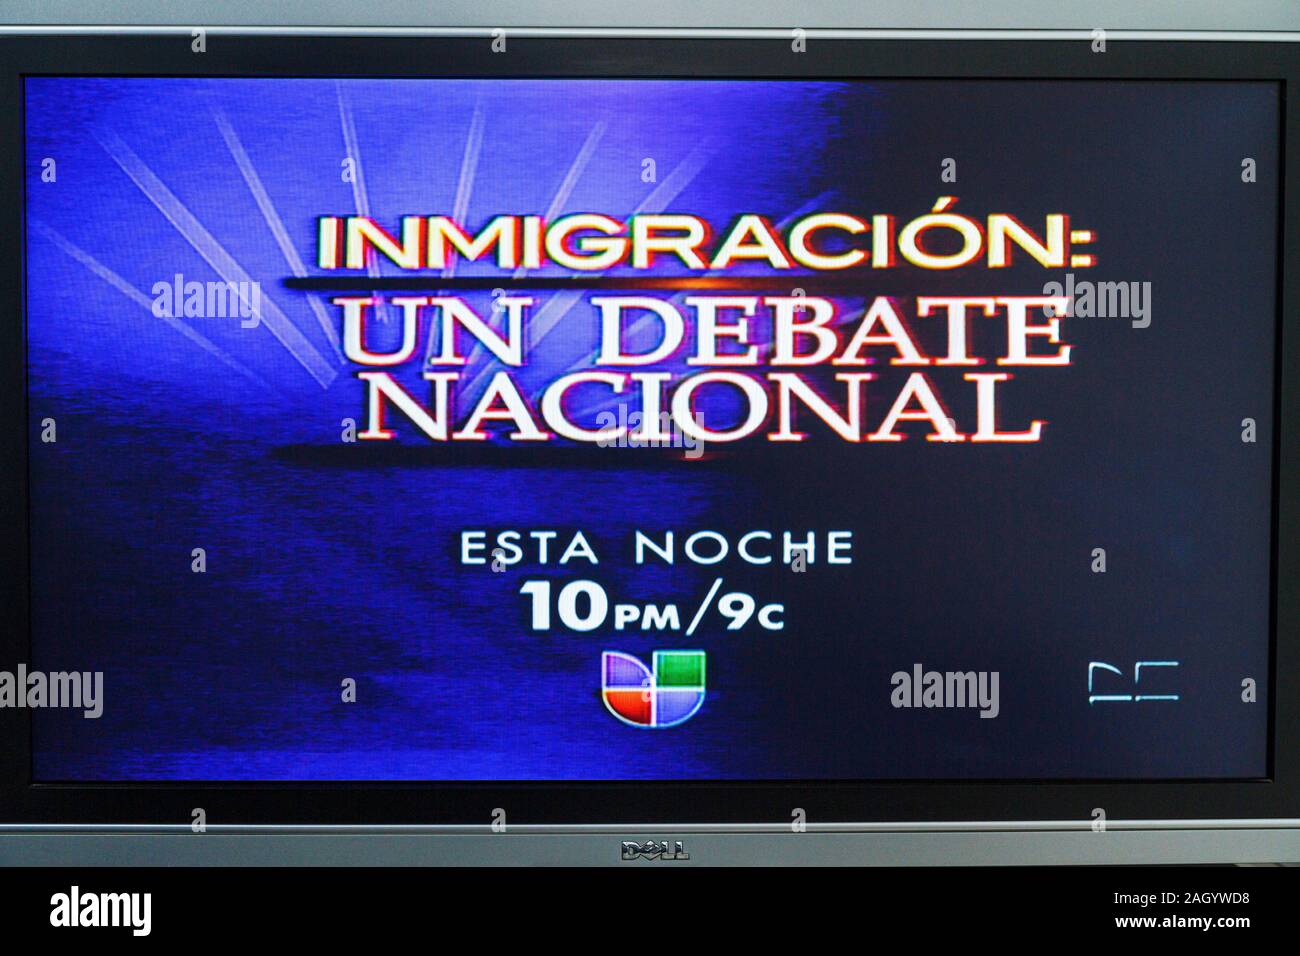 Miami Beach Florida,television,set,TV,flat panel,screen,monitor,cable channel,Spanish language,bilingual,immigration debate,visitors travel traveling Stock Photo